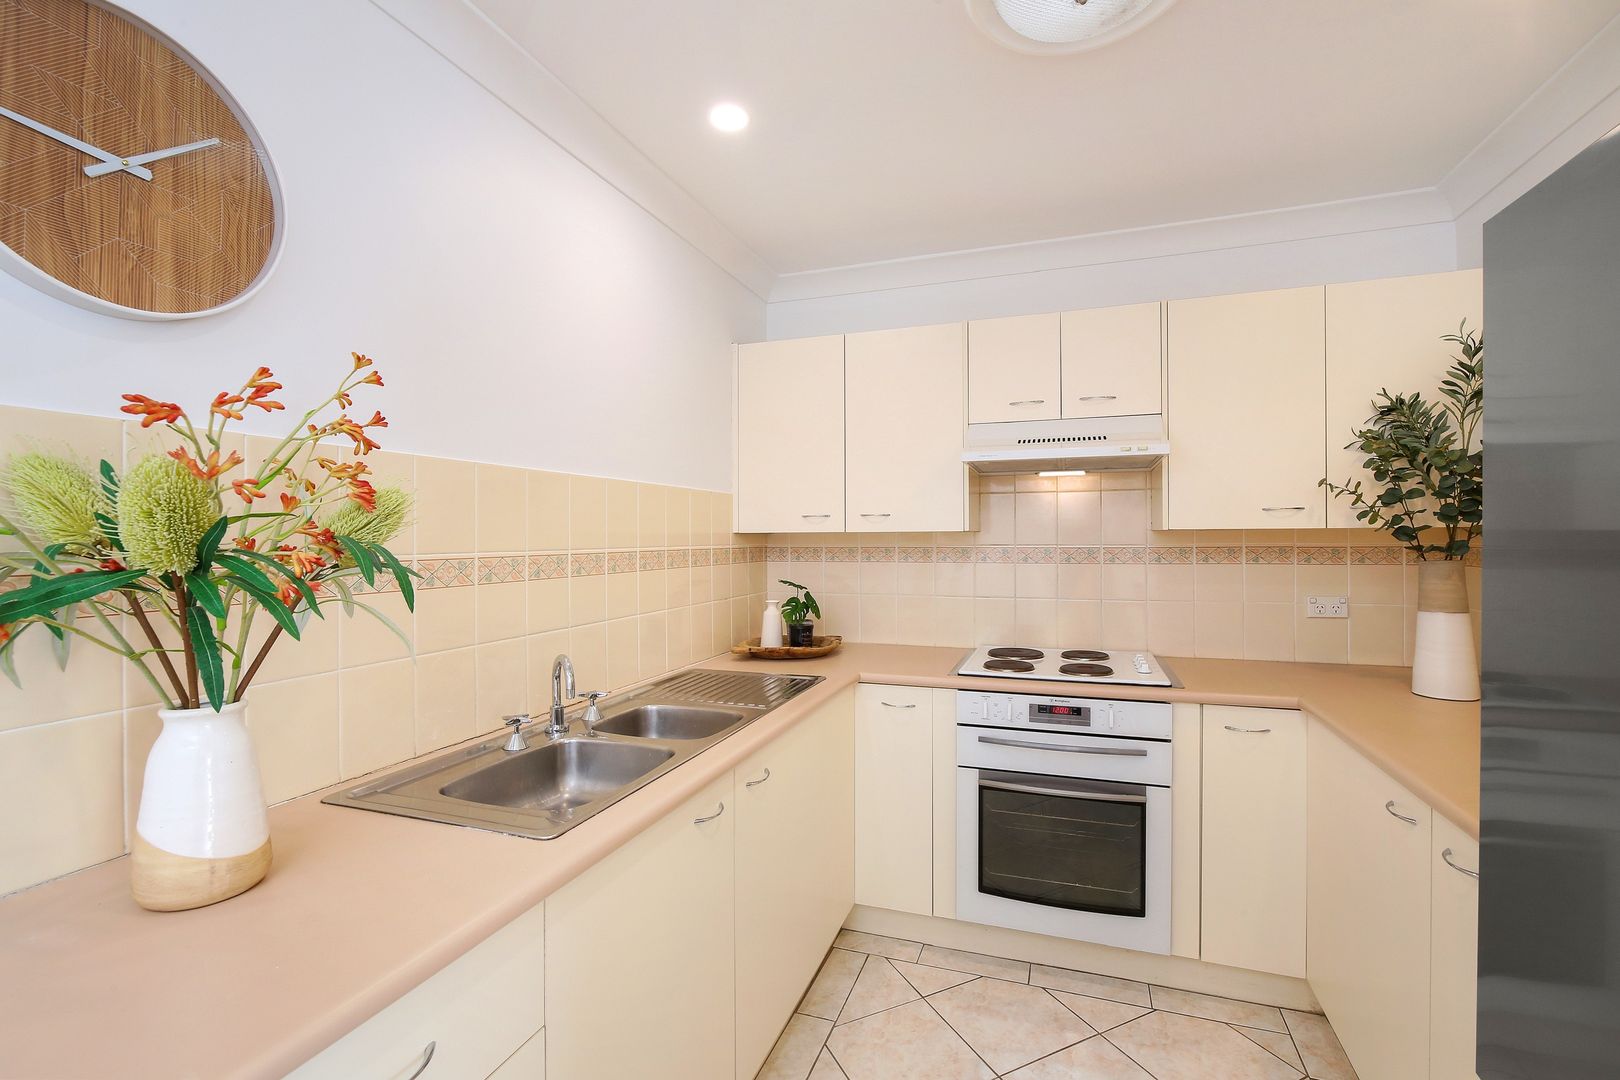 1/13 Stacey Close, Kariong NSW 2250, Image 2